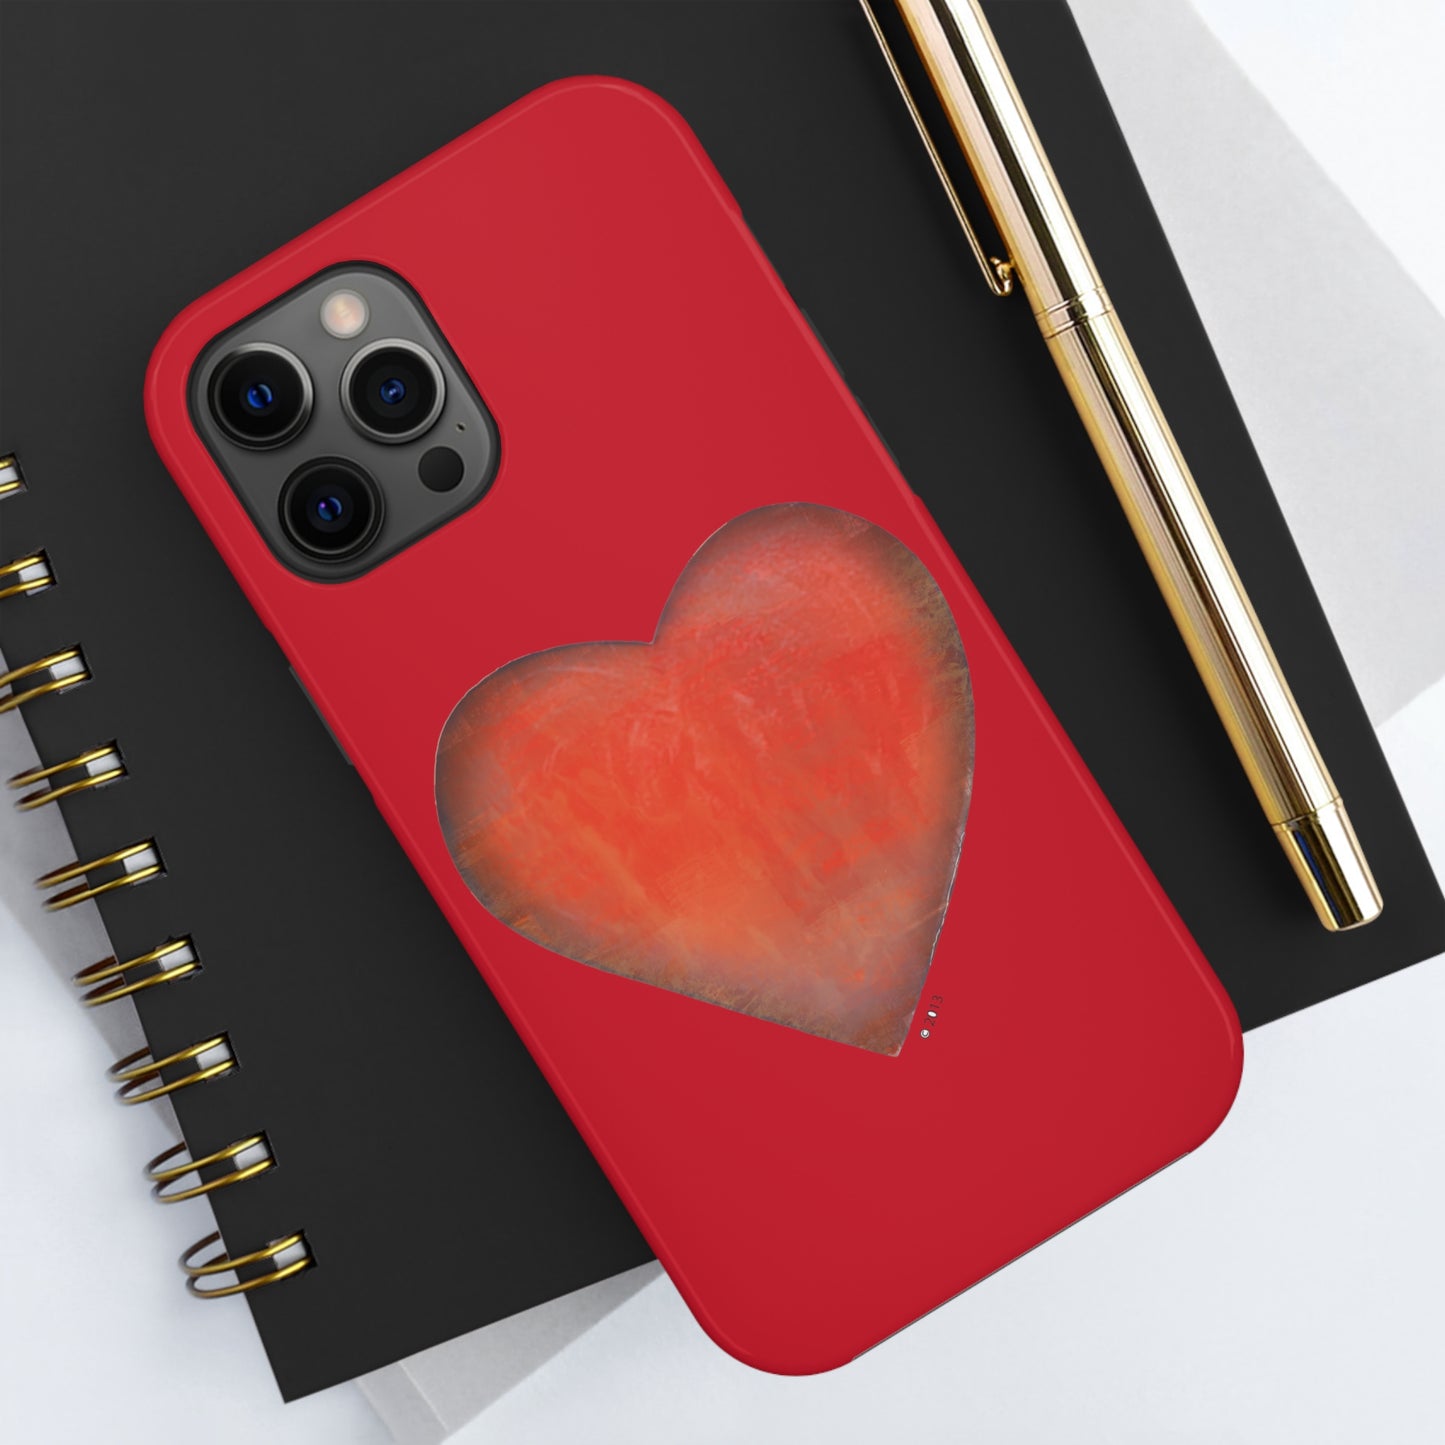 Tough iPhone Cases - Red Heart